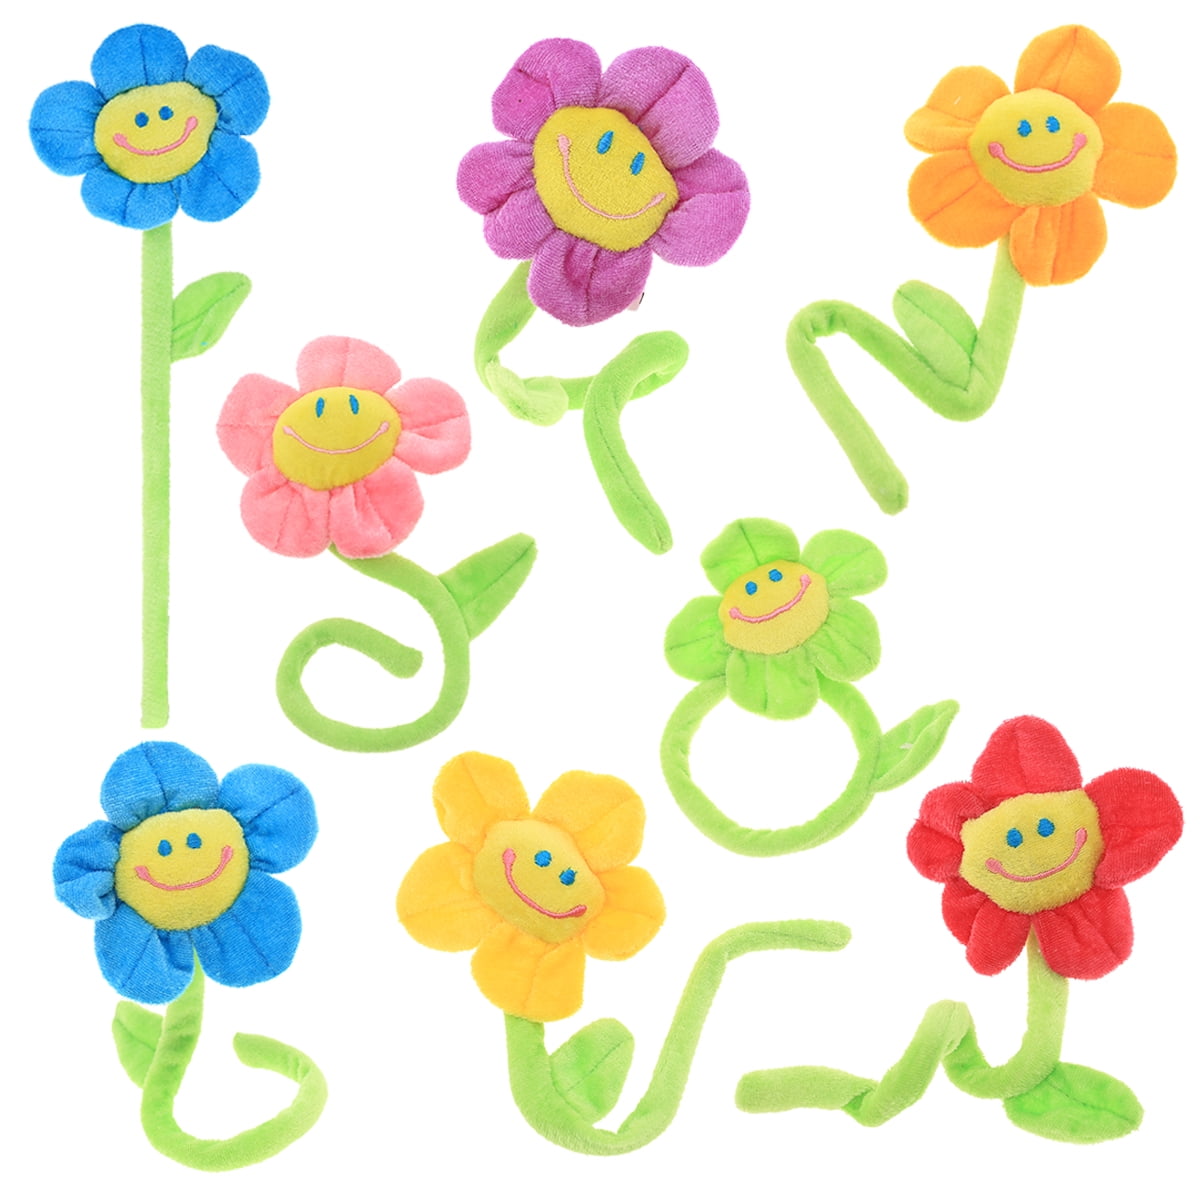 Playside Creations, Felt Daisy Stickers, Assorted Colors, 8 Count